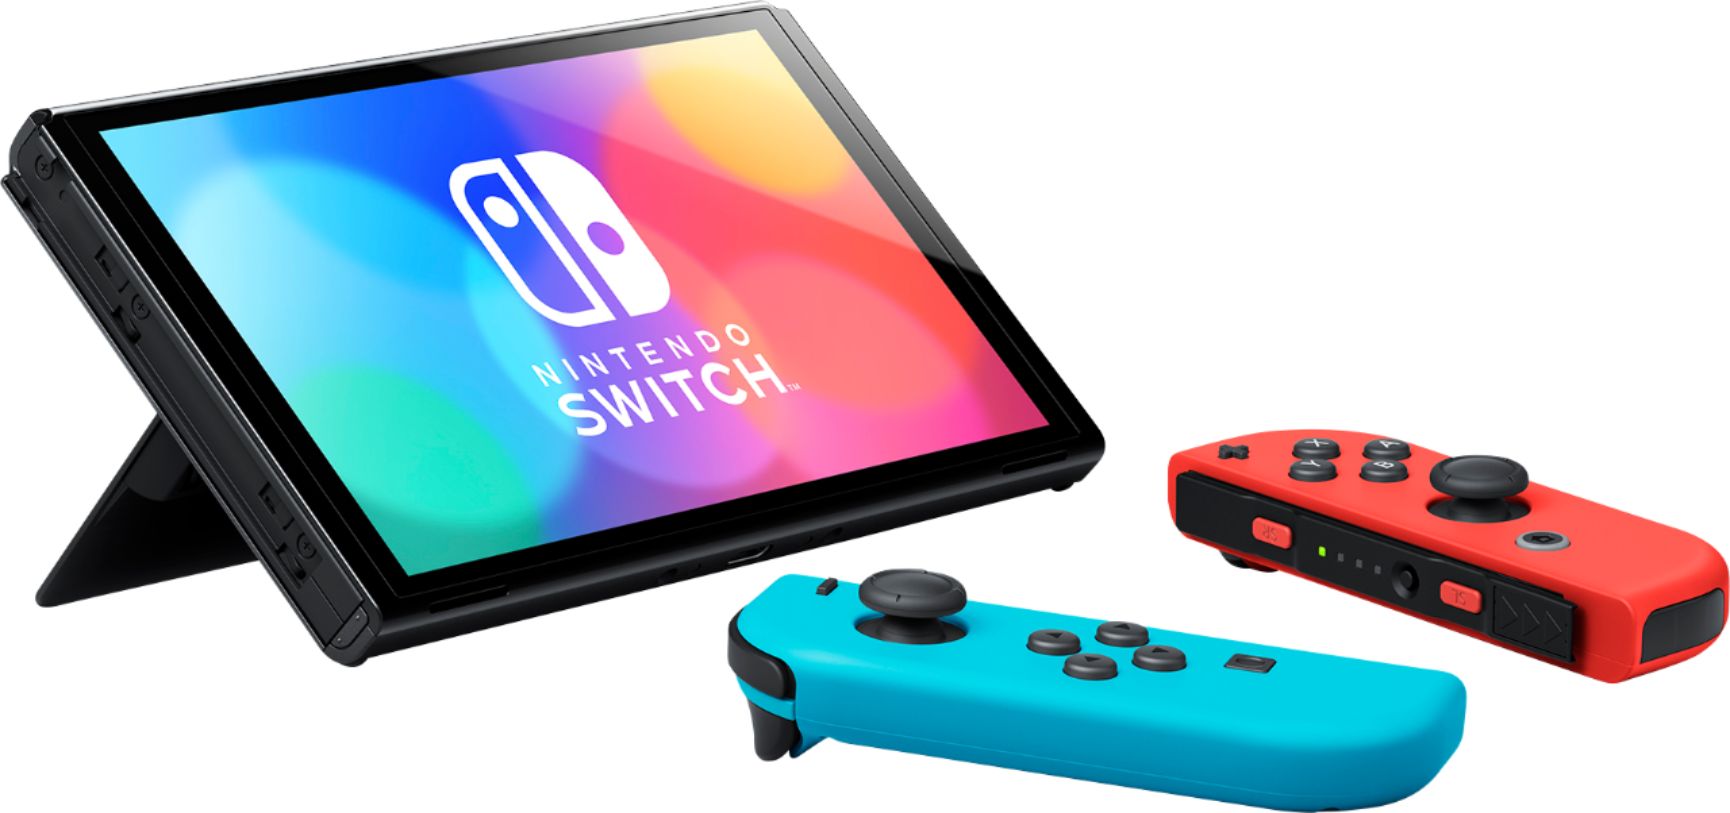 2022 New Nintendo Switch OLED Model Neon Red Blue with 1-2 Switch and Mytrix Full Body Skin Sticker for NS OLED Console, Dock and Joycons - Sushi Set